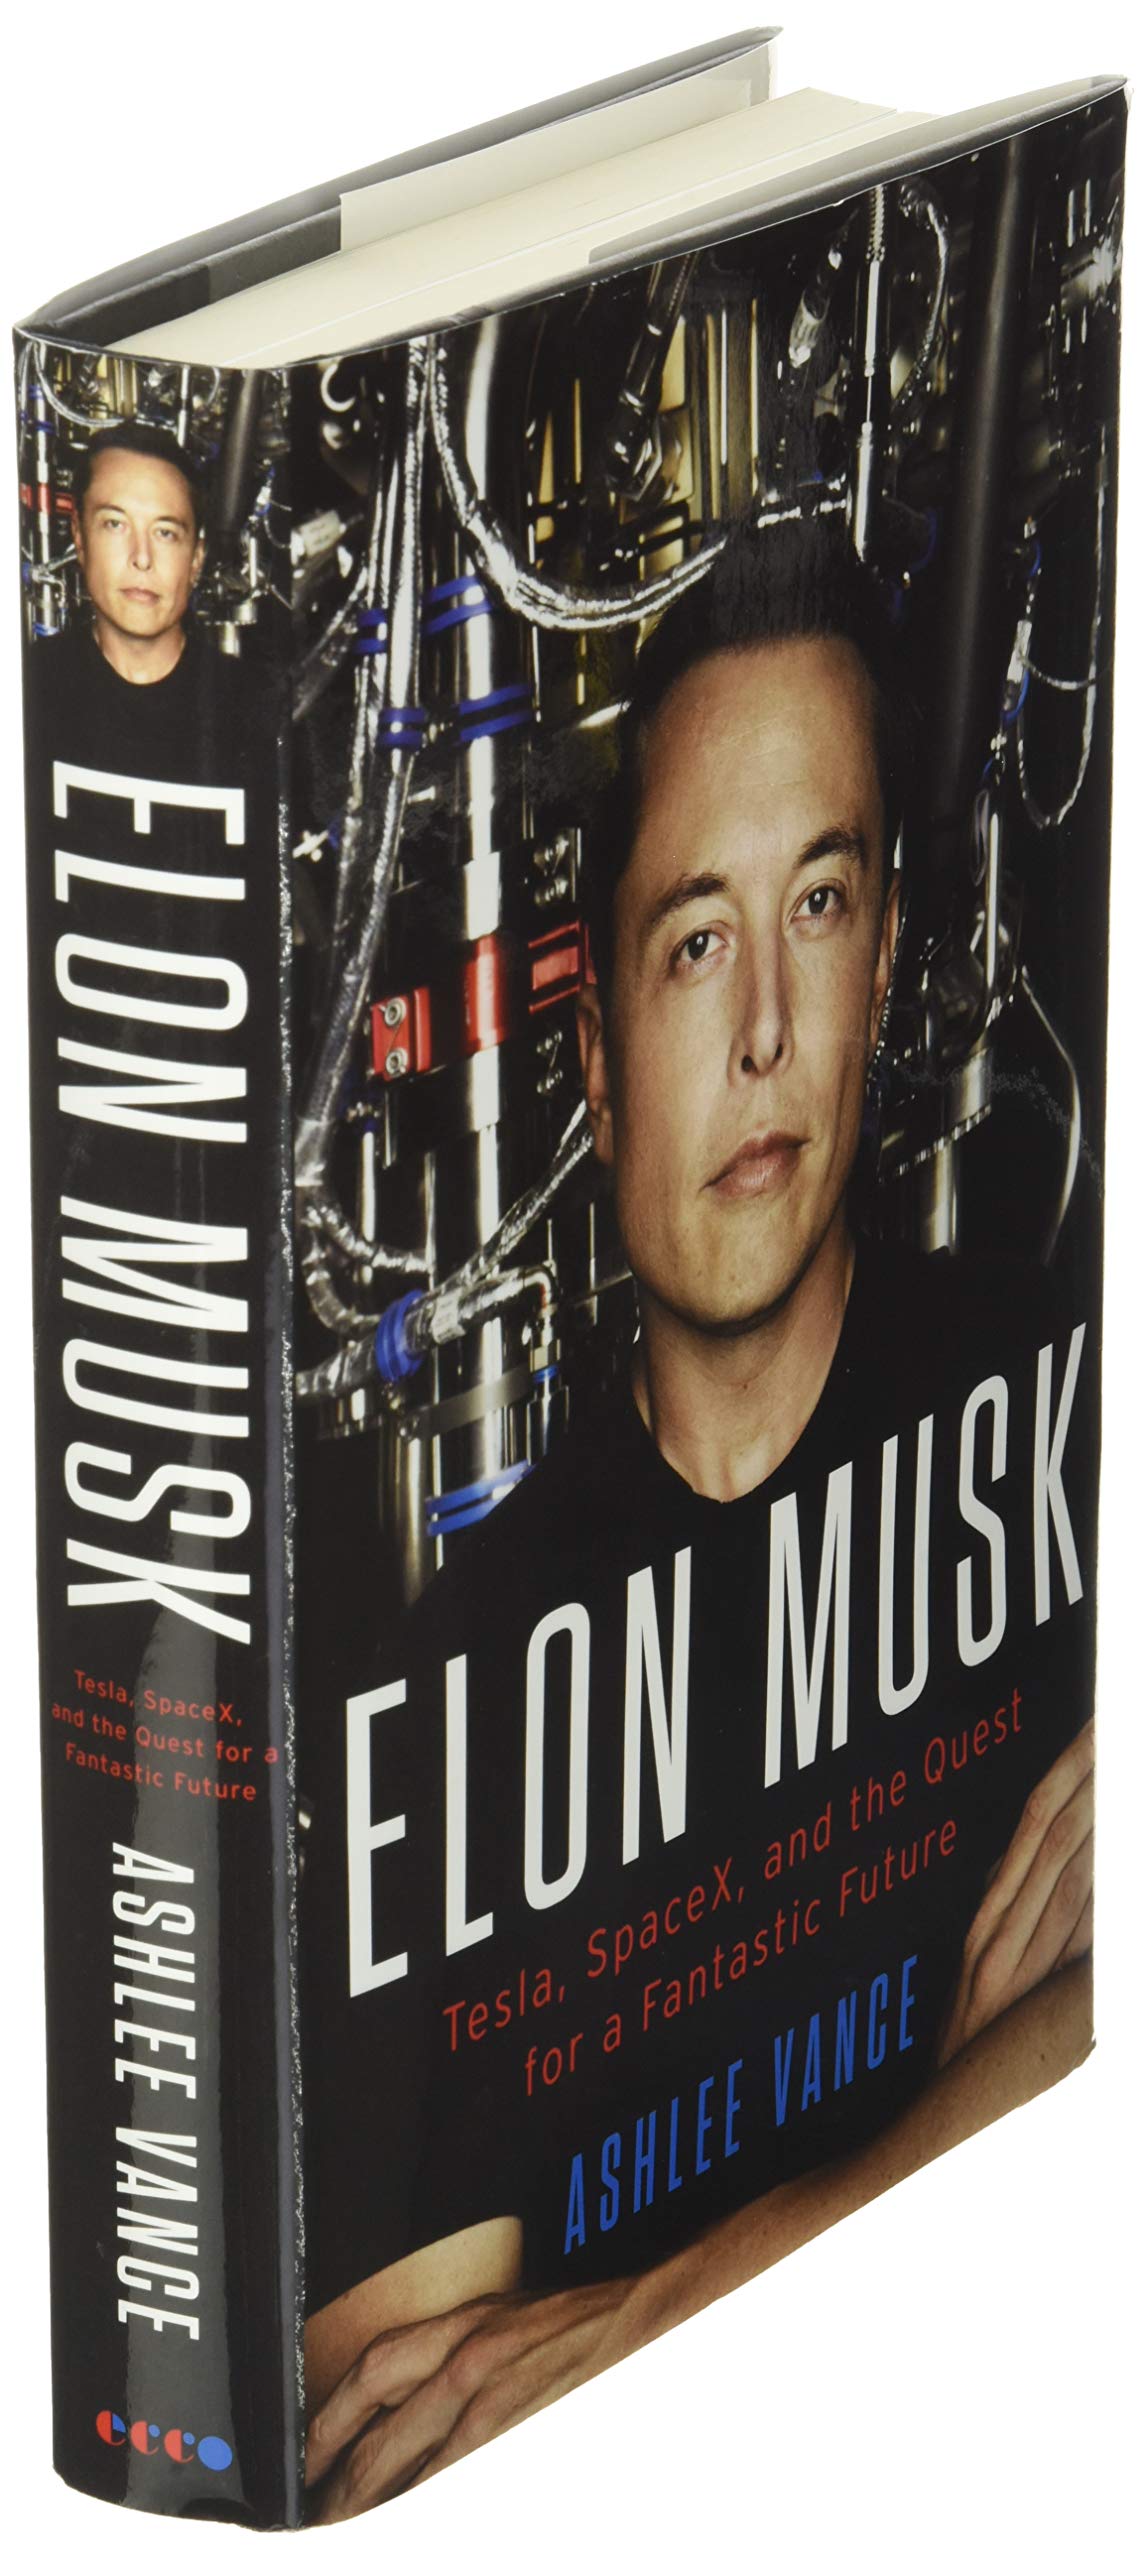 Elon Musk Tesla, SpaceX, and the Quest for a Fantastic Future - Biography about Elon Musk